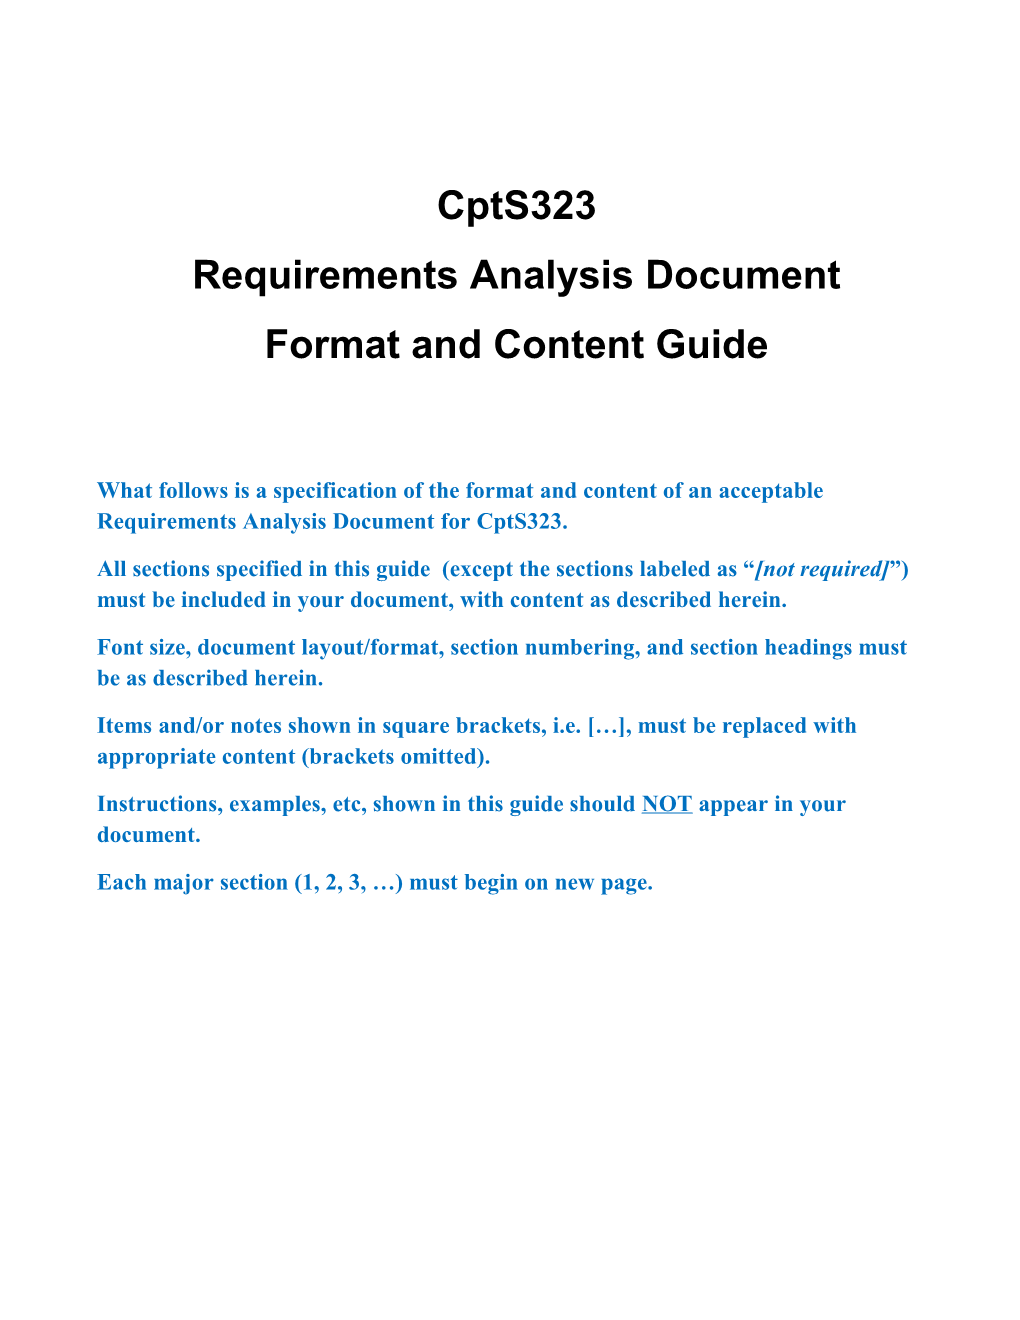 Requirements Analysis Document Insert Product Name Here in Header